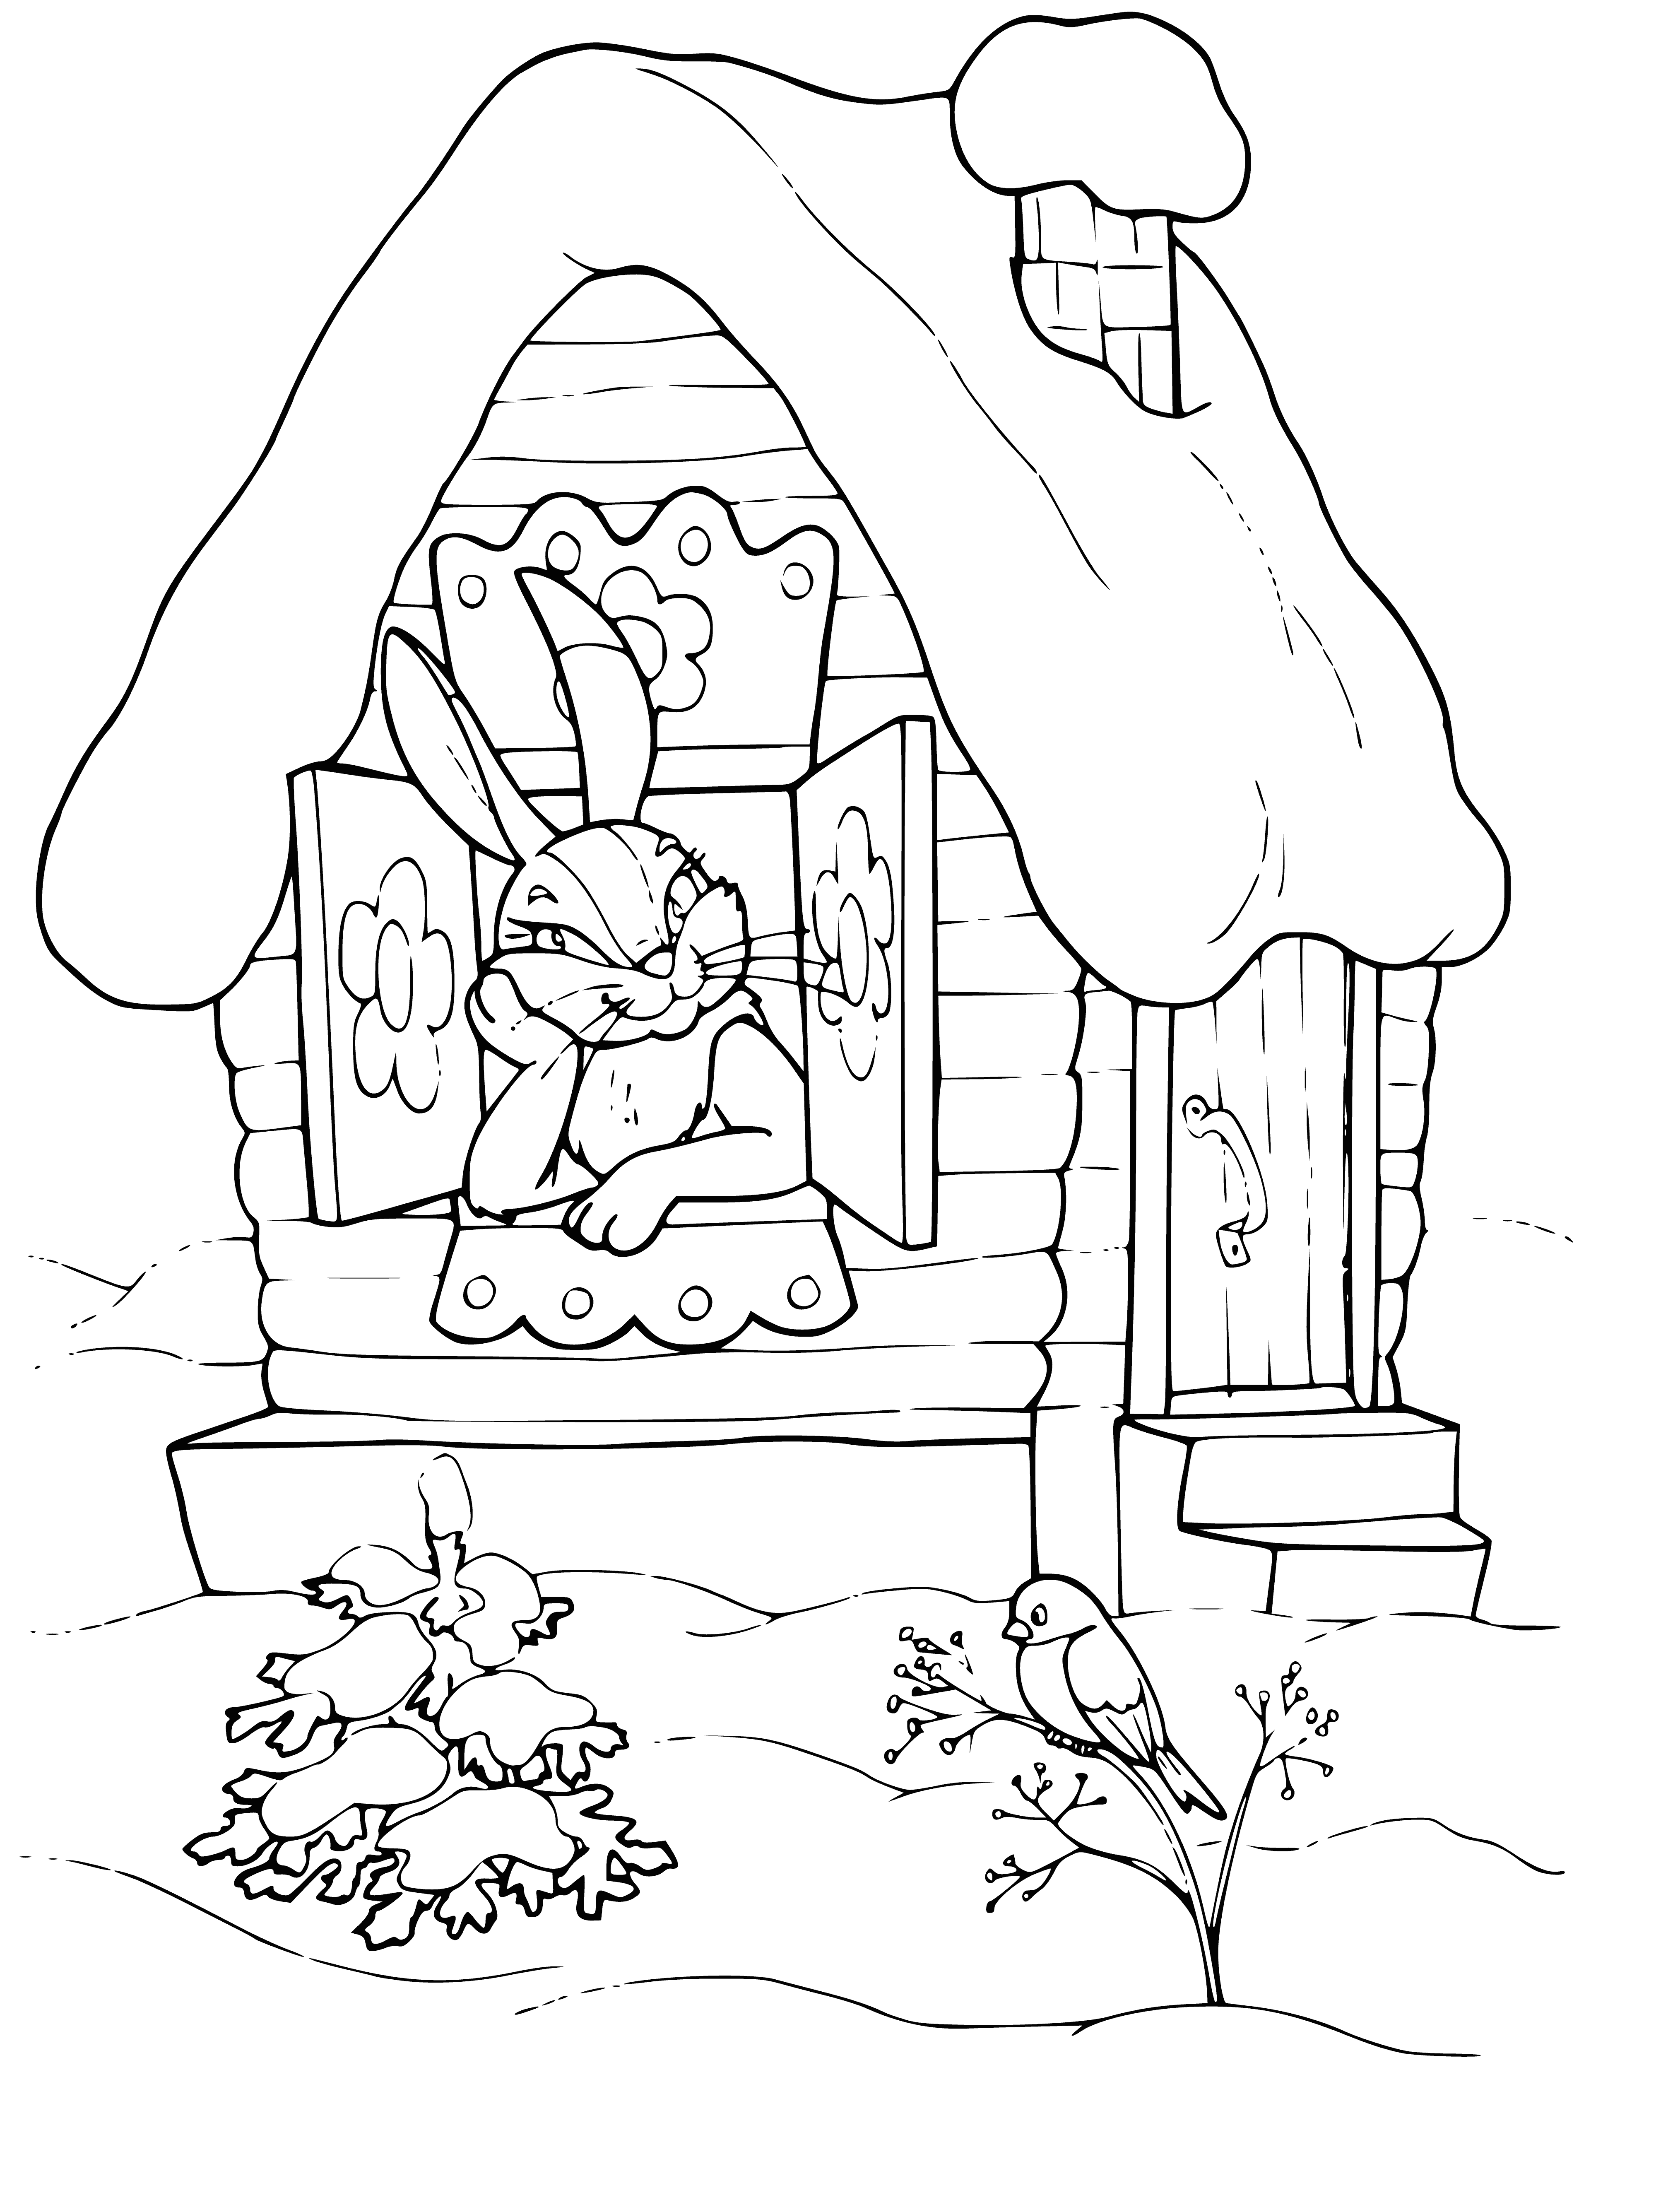 coloring page: 3 people looking at a hut w/ door, windows, smoke from chimney.